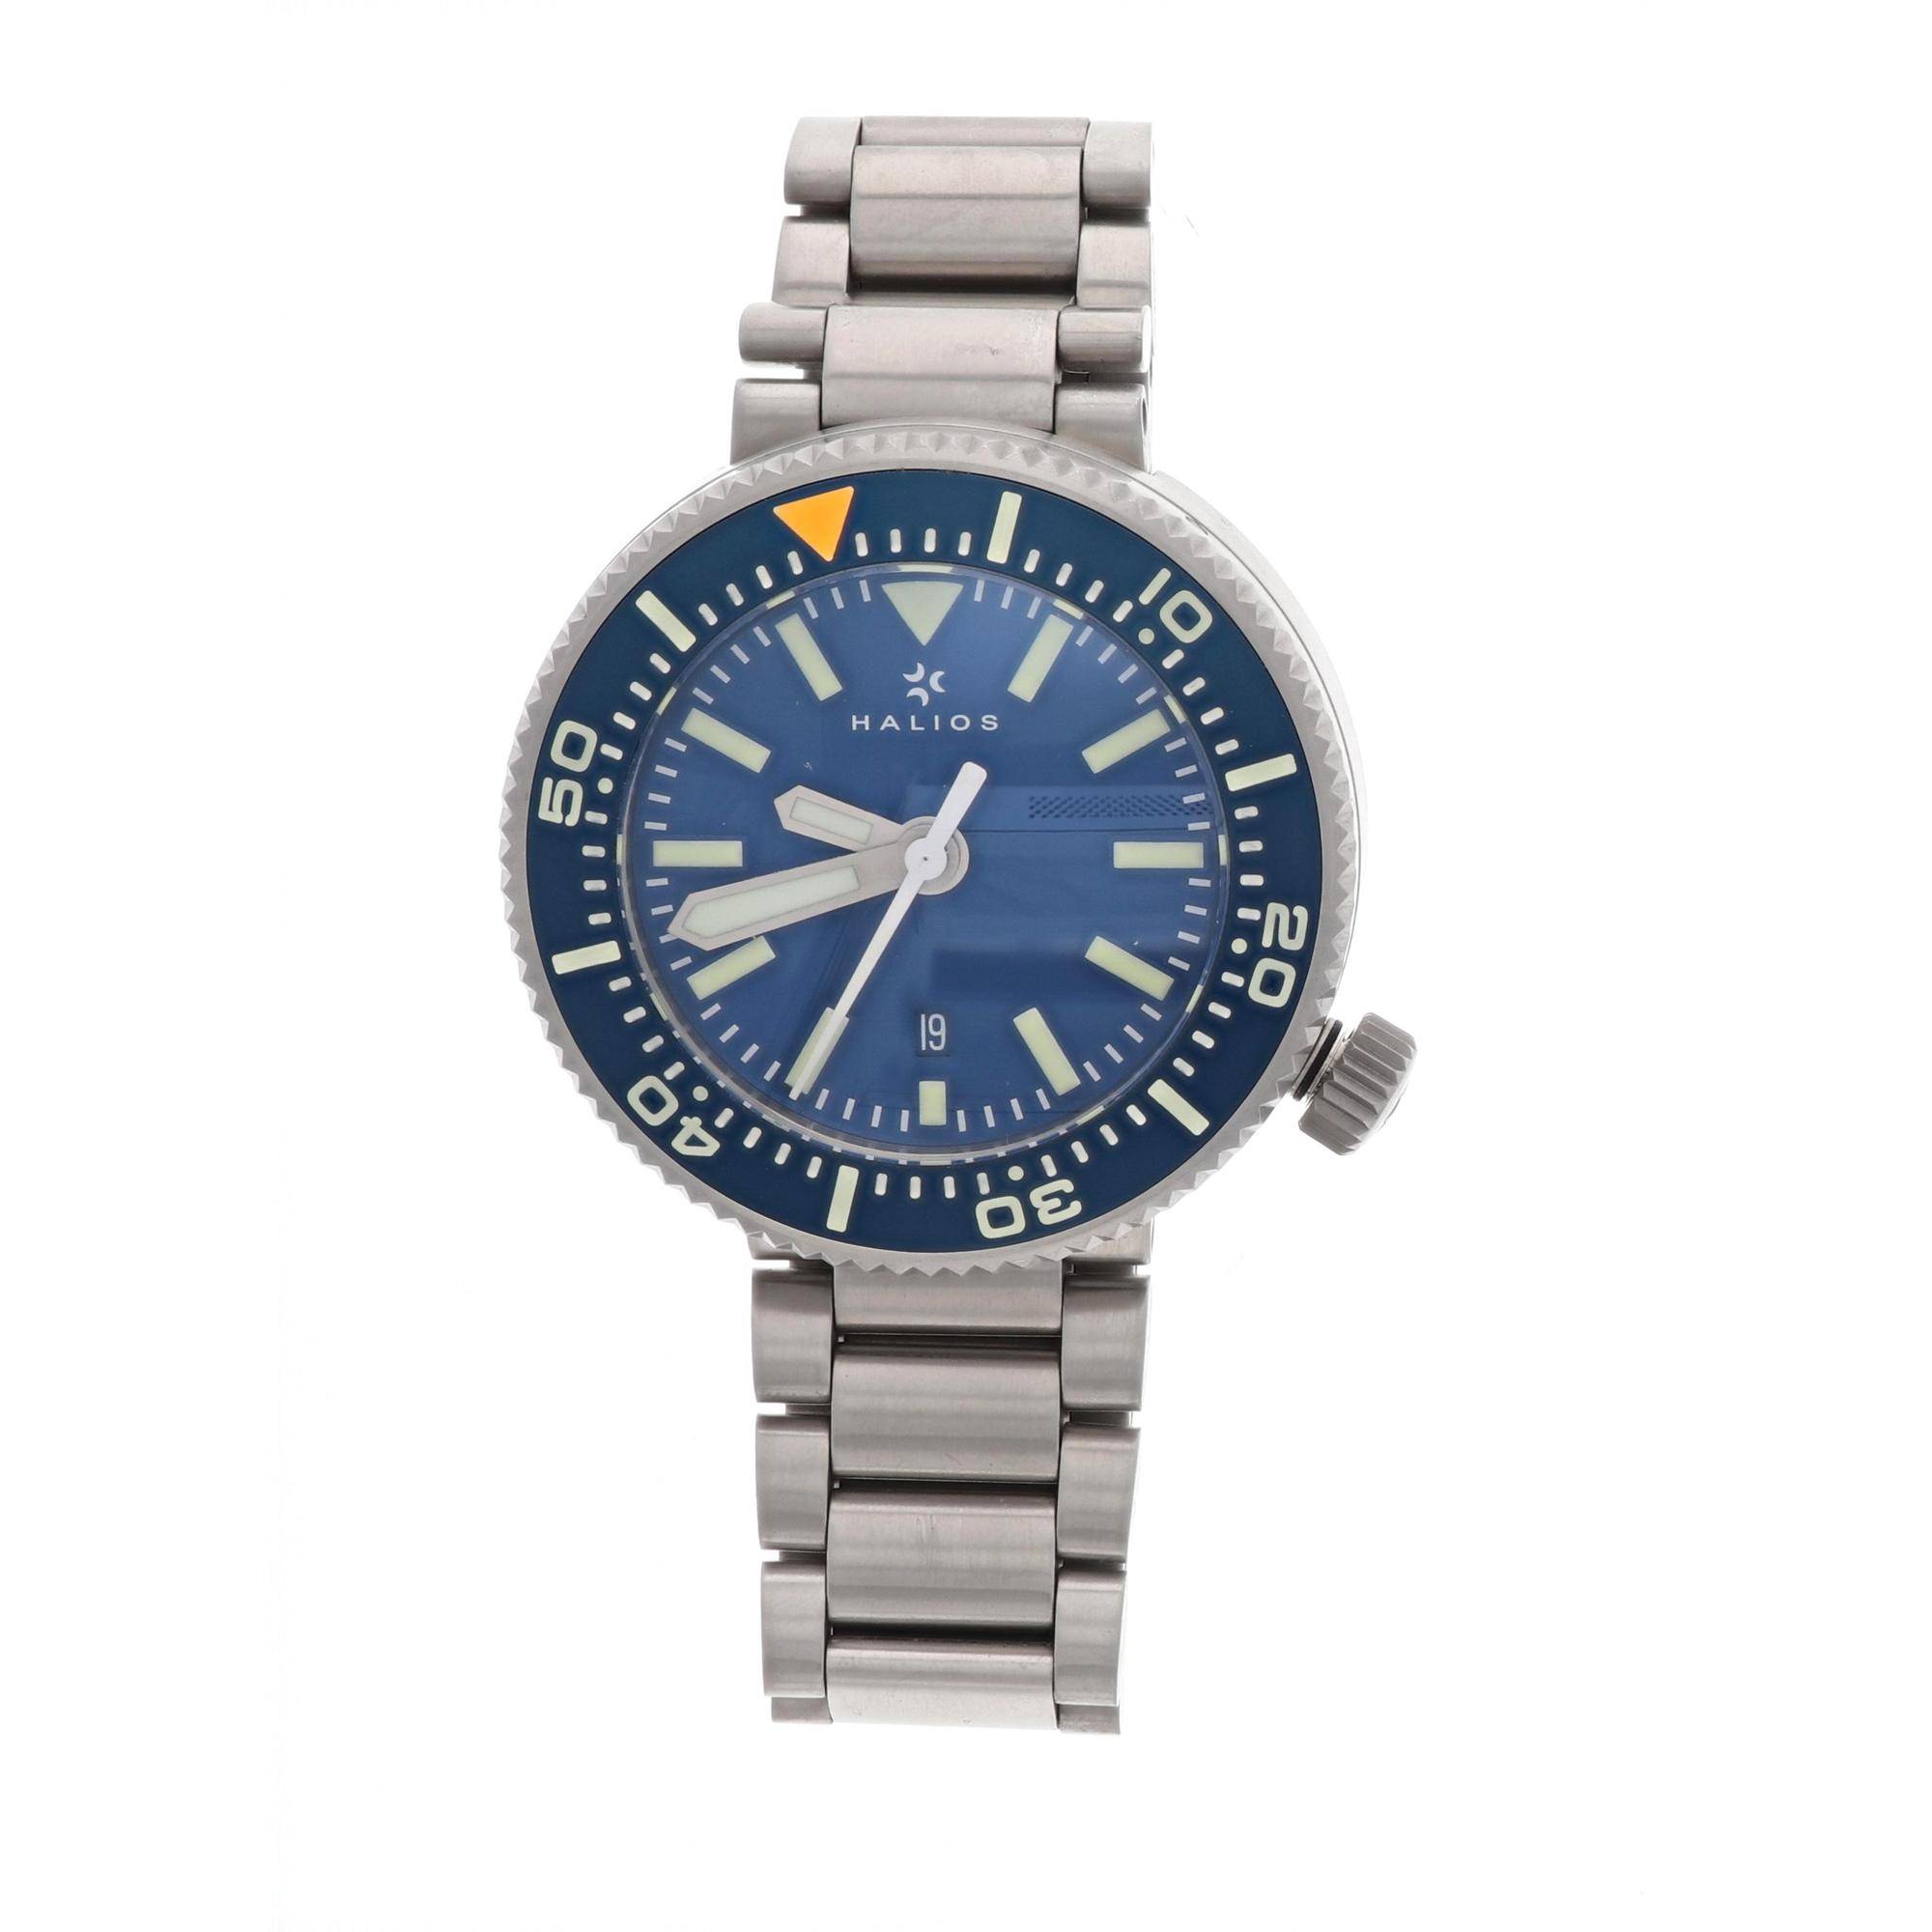 What is special about Halios? | WatchUSeek Watch Forums